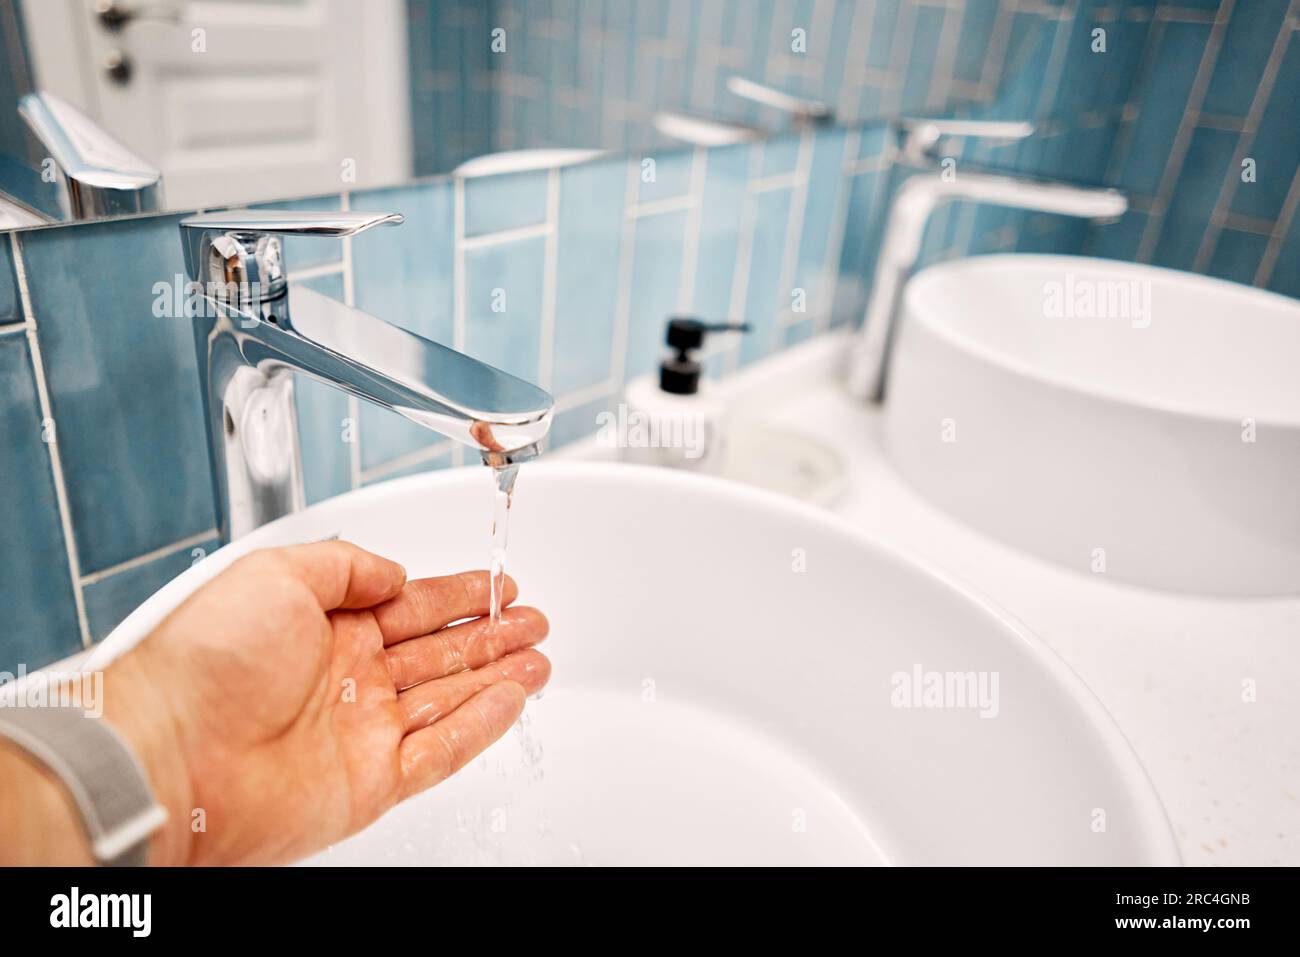 A man's hand touches the water in a beautiful sink with a metal faucet next to an mirror. Close-up of an elegant faucet in the bathroom sink next to s Stock Photo